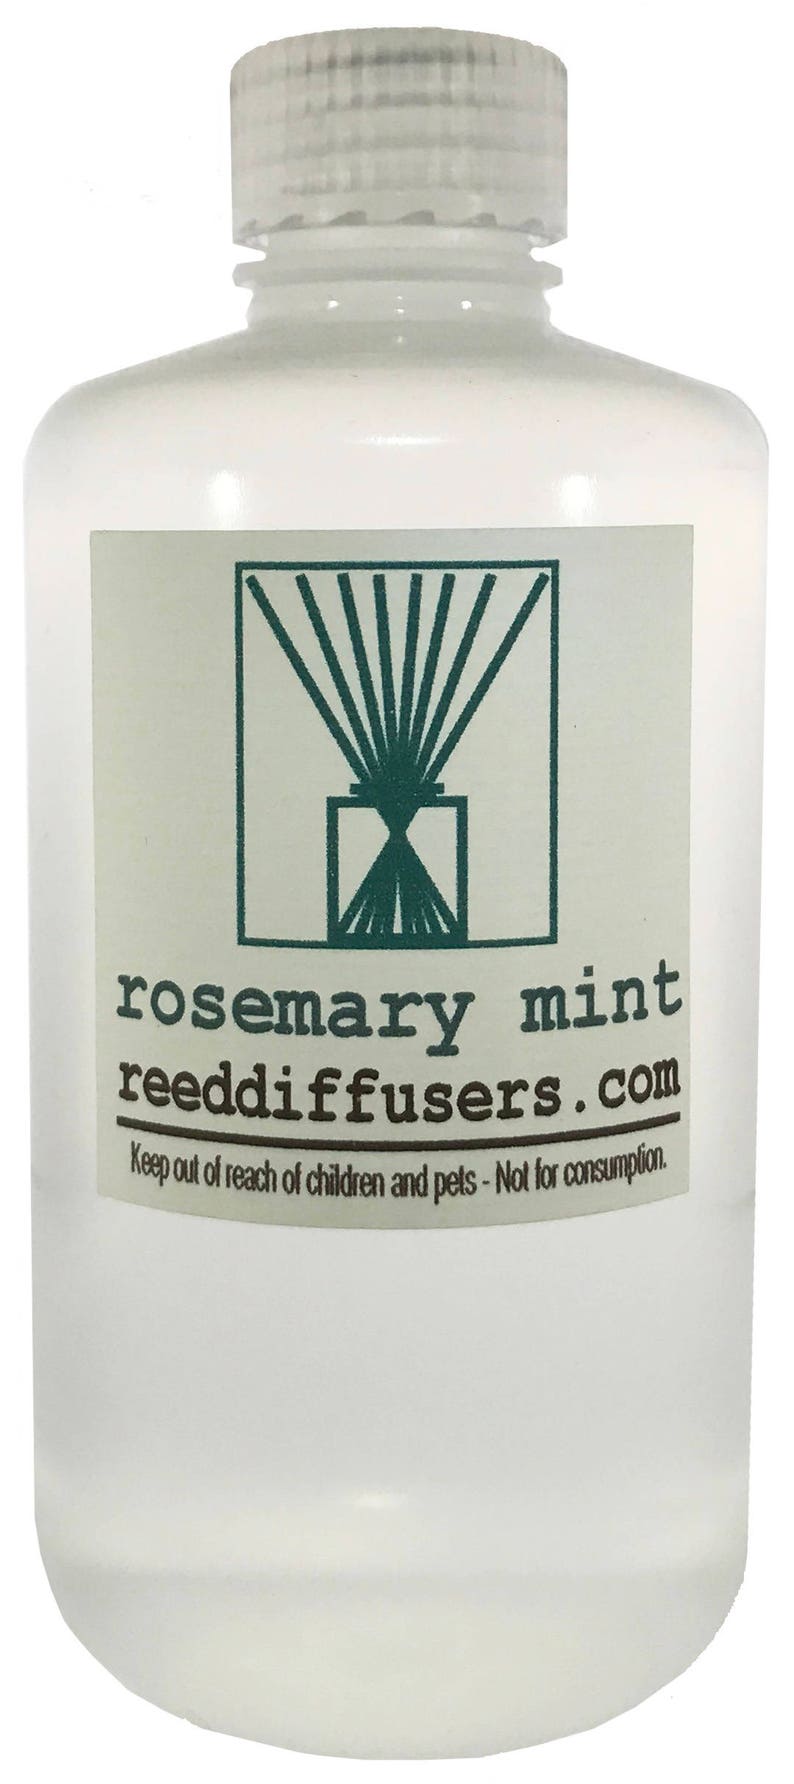 8 oz Rosemary Mint Fragrance Reed Diffuser Oil Refill with reeds Made in the USA image 1